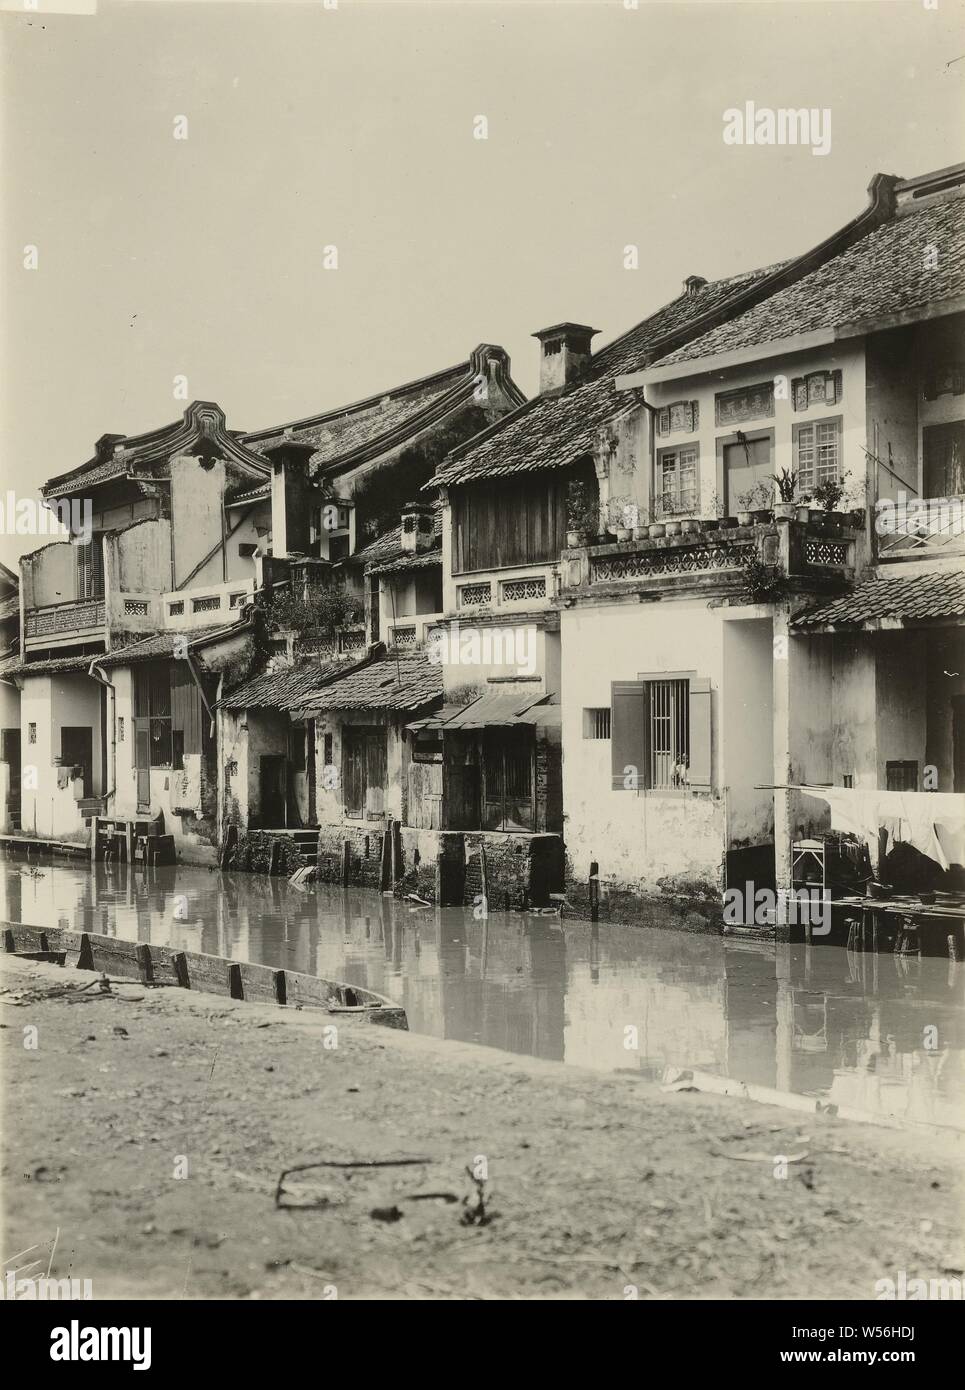 Dutch buildings in Batavia, One of six photos (black and white) of Dutch buildings and the Chinese quarter in Batavia (Jakarta), Dutch East Indies. Brands, reverse: stamp: 'chief of the archaeological service' and weapon of the Netherlands, Dutch East Indies, The, Batavia, Oudheidkundige dienst, c. 1900, paper, h 23 cm × w 17 cm Stock Photo